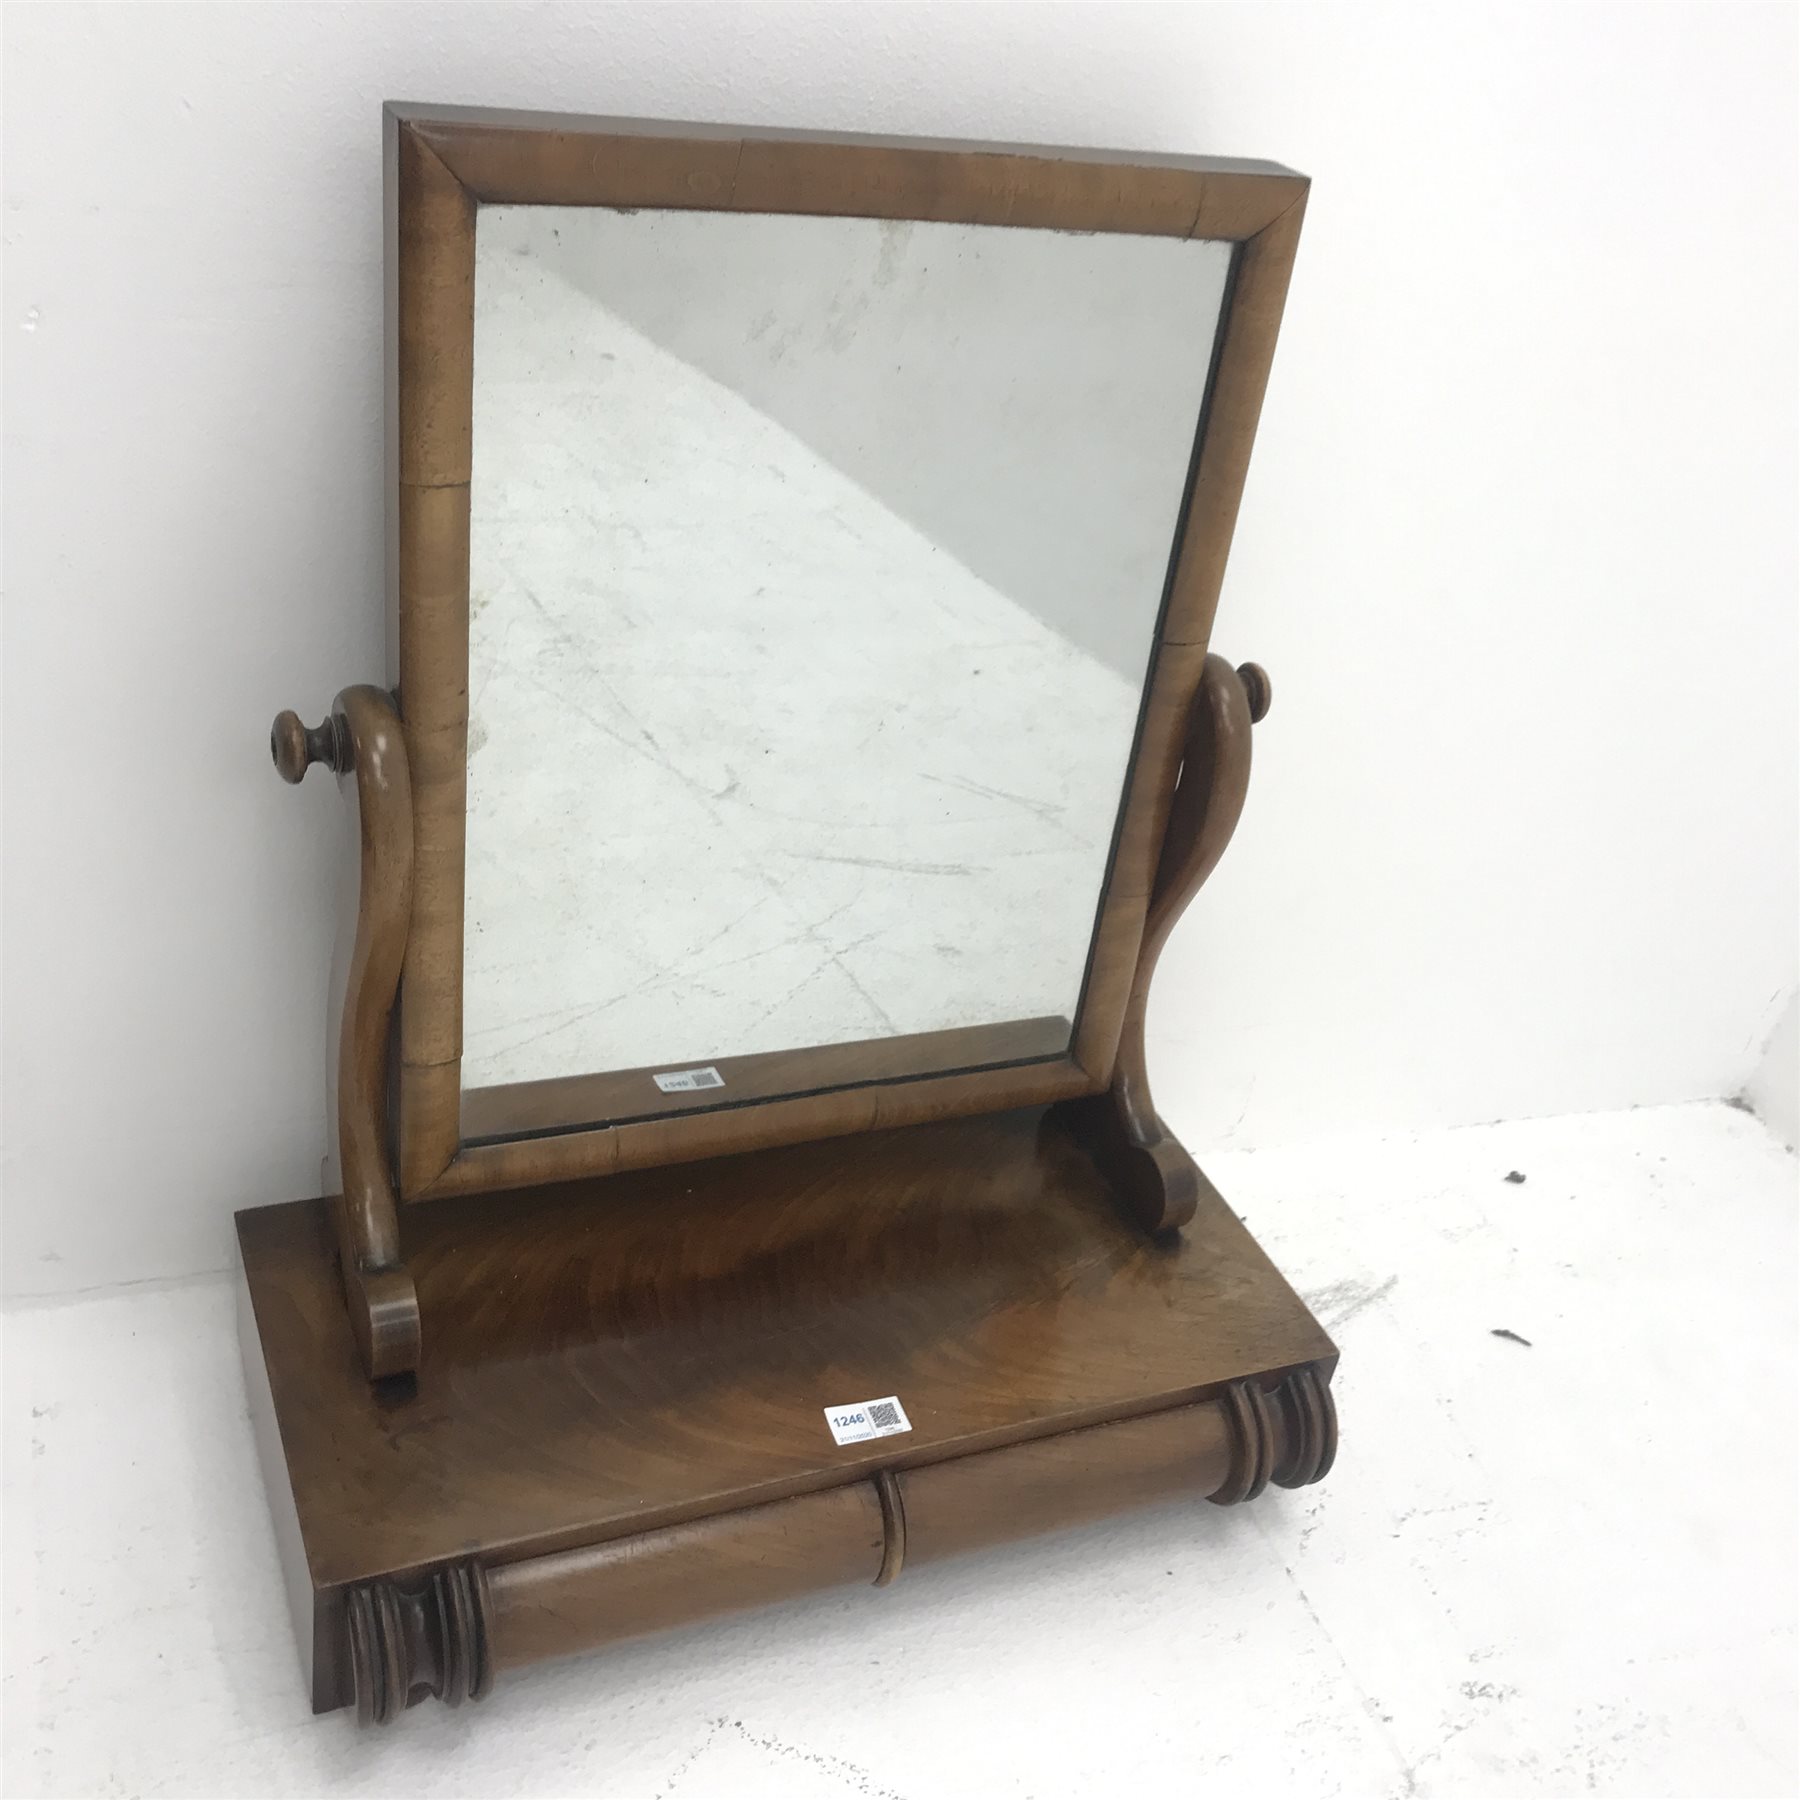 19th century mahogany dressing table mirror, scrolling supports, two drawers, W52cm, H65cm, D26cm - Image 2 of 3